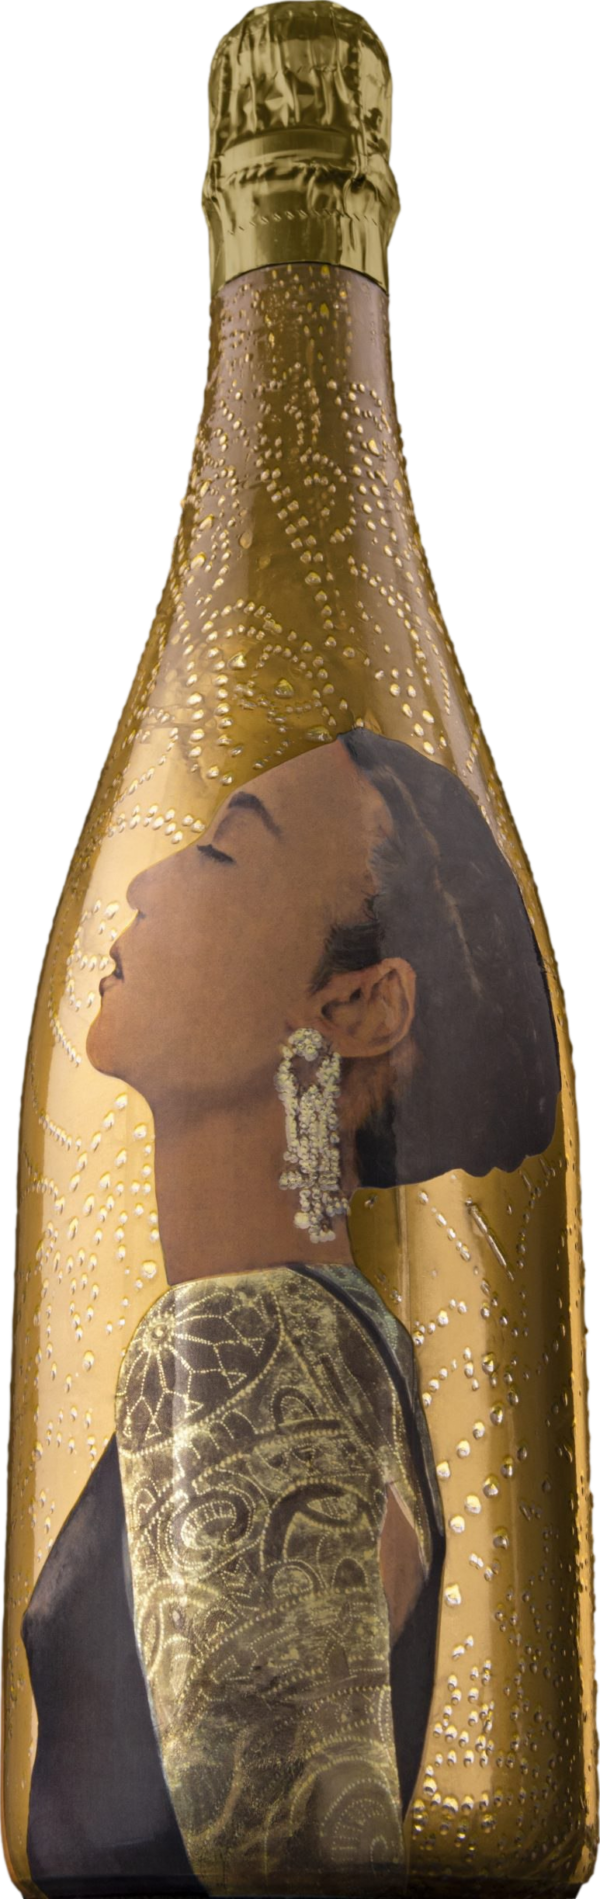 Product image of Champagne VIK La Piu Belle Millesime 2009 from 8wines